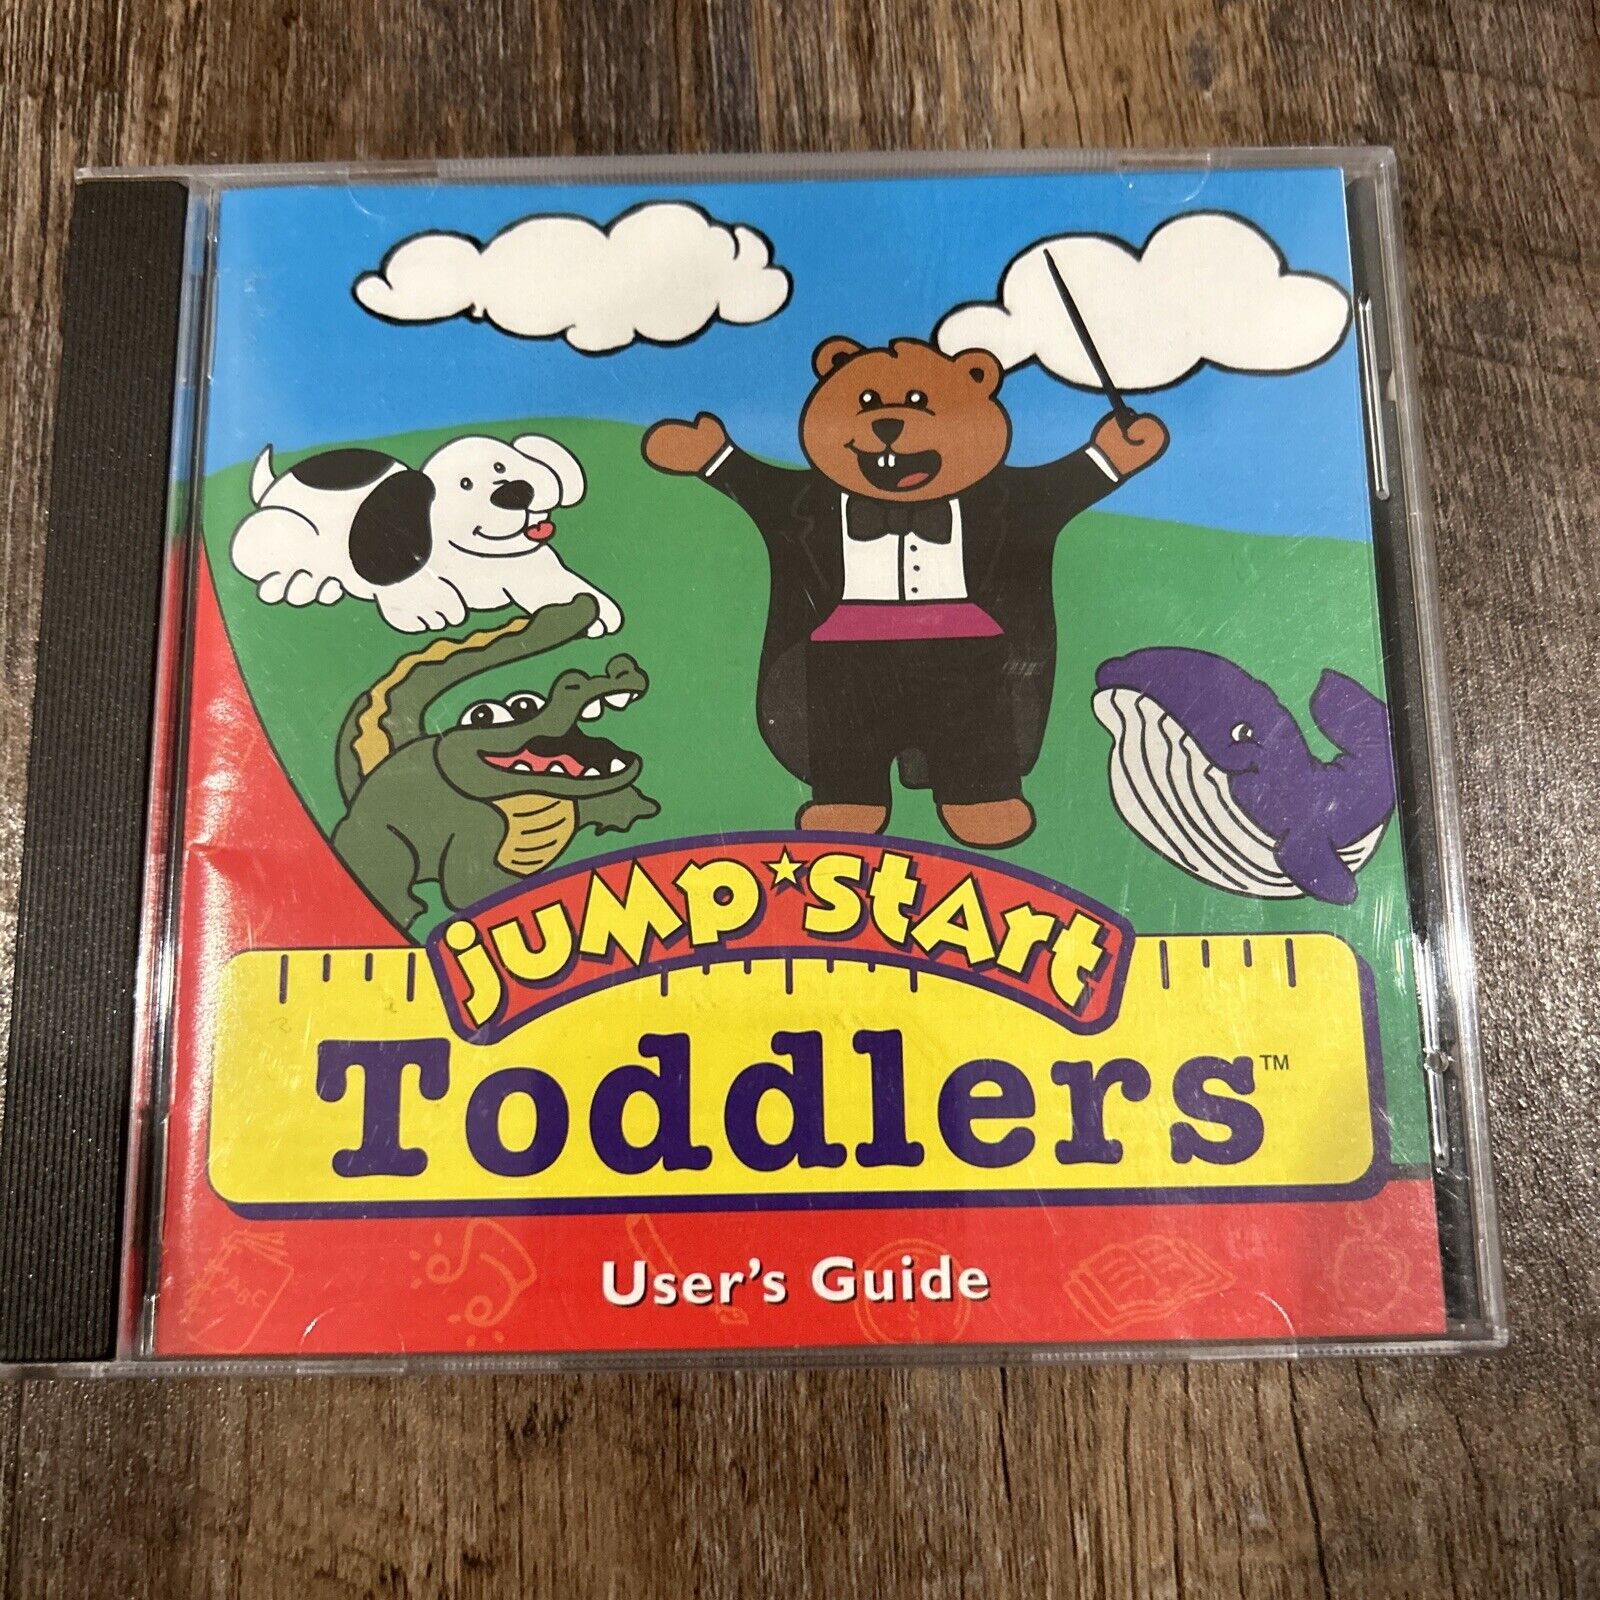 Jump Start Toddlers CD Windows 95 from Knowledge Adventure